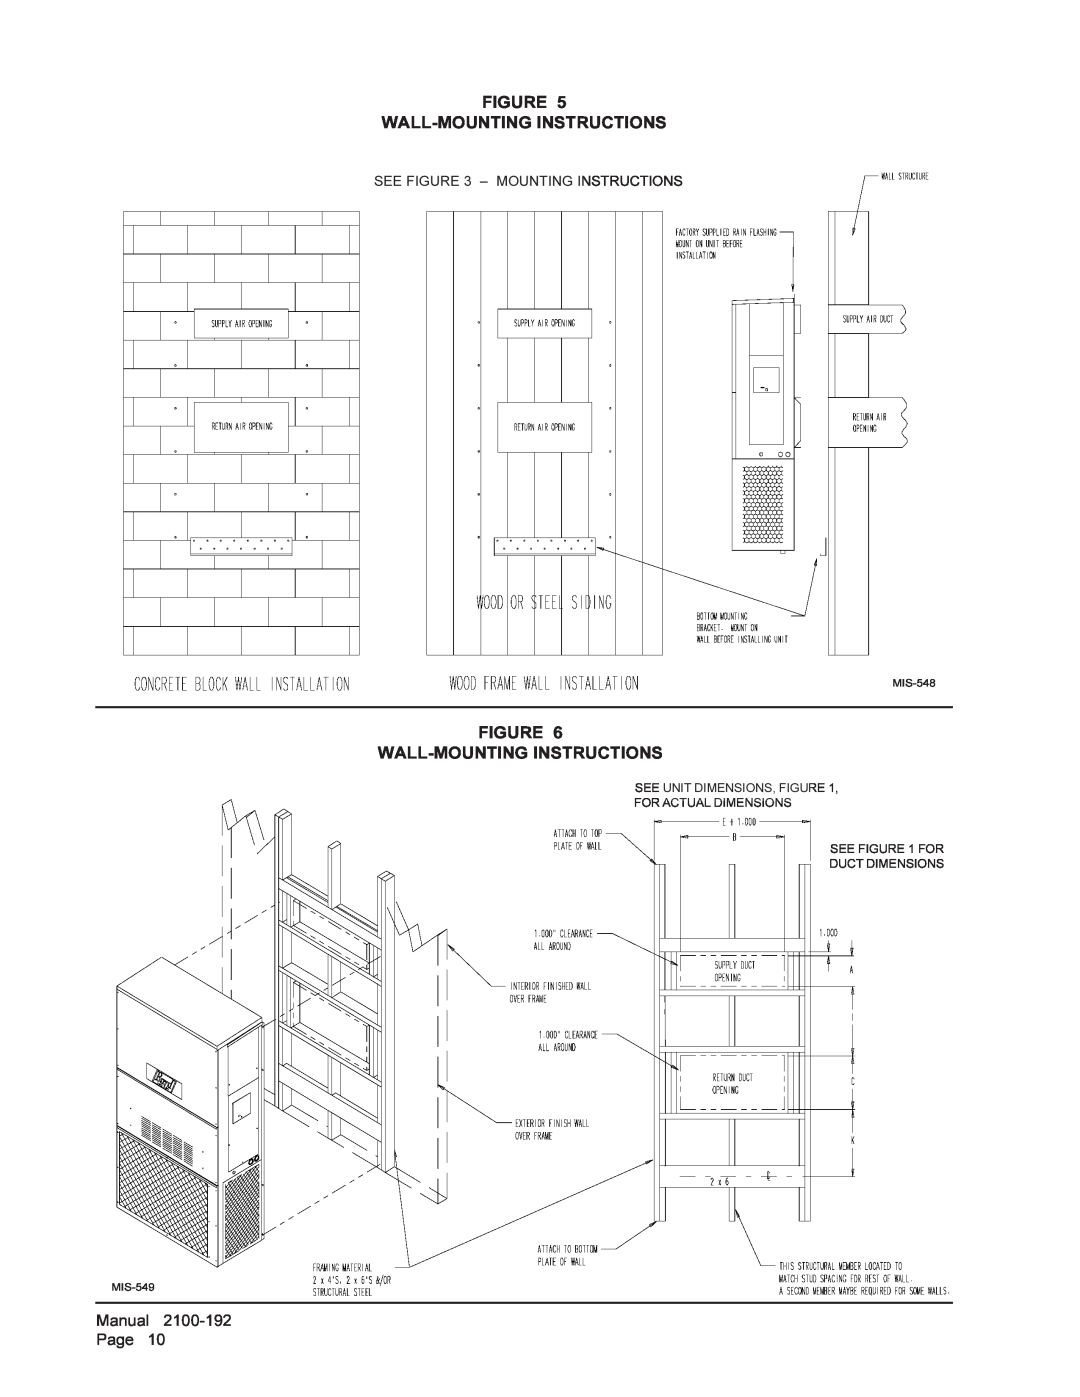 Bard WA361 Figure Wall-Mountinginstructions, See Unit Dimensions, Figure For Actual Dimensions, See For Duct Dimensions 